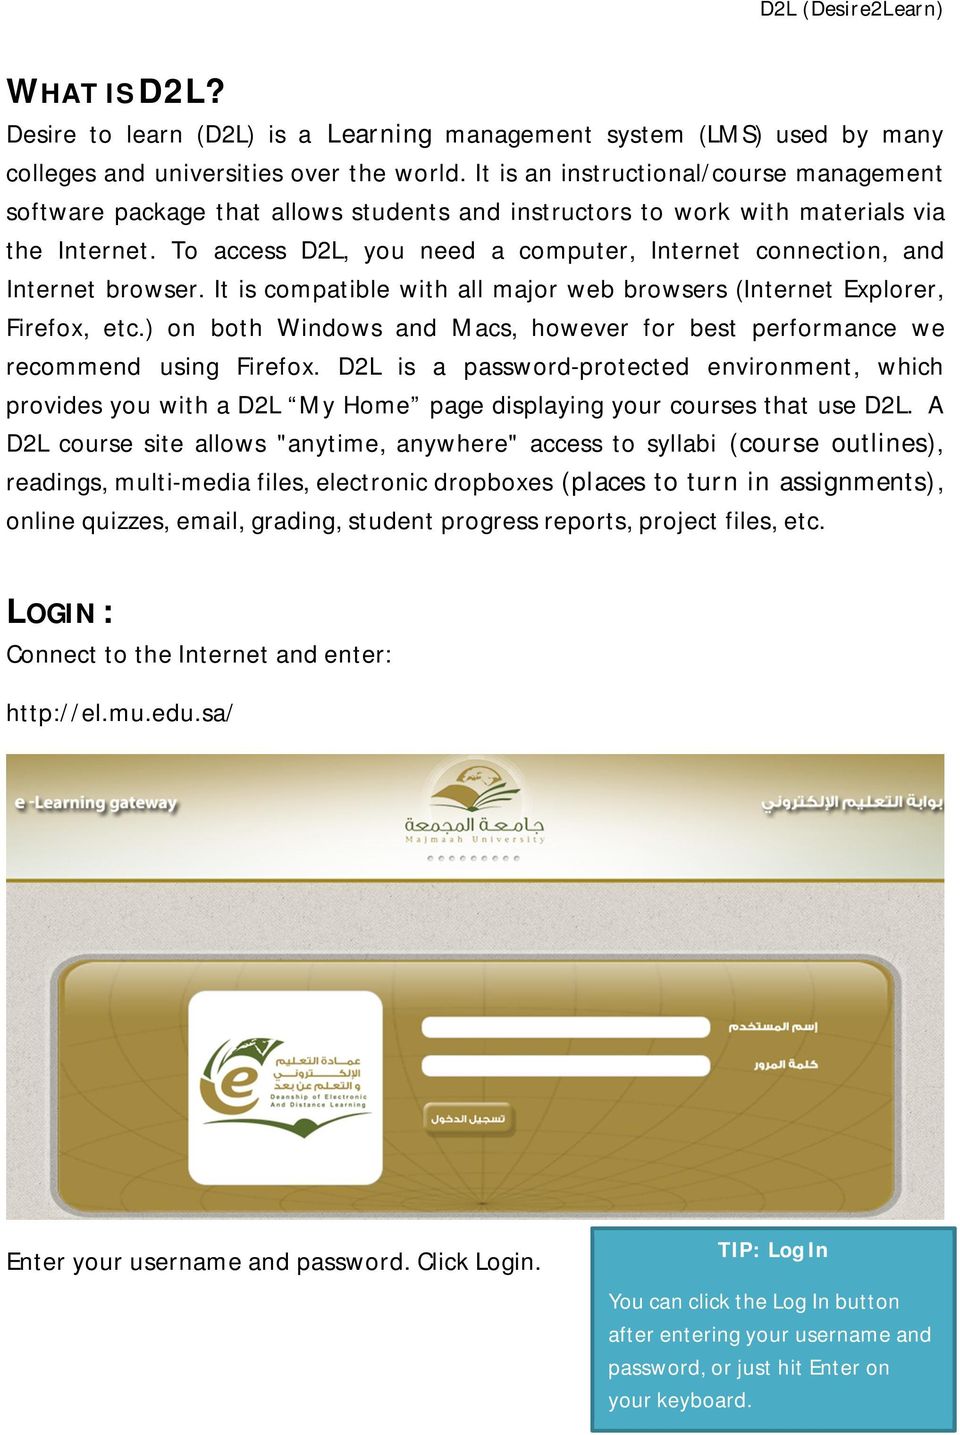 To access D2L, you need a computer, Internet connection, and Internet browser. It is compatible with all major web browsers (Internet Explorer, Firefox, etc.